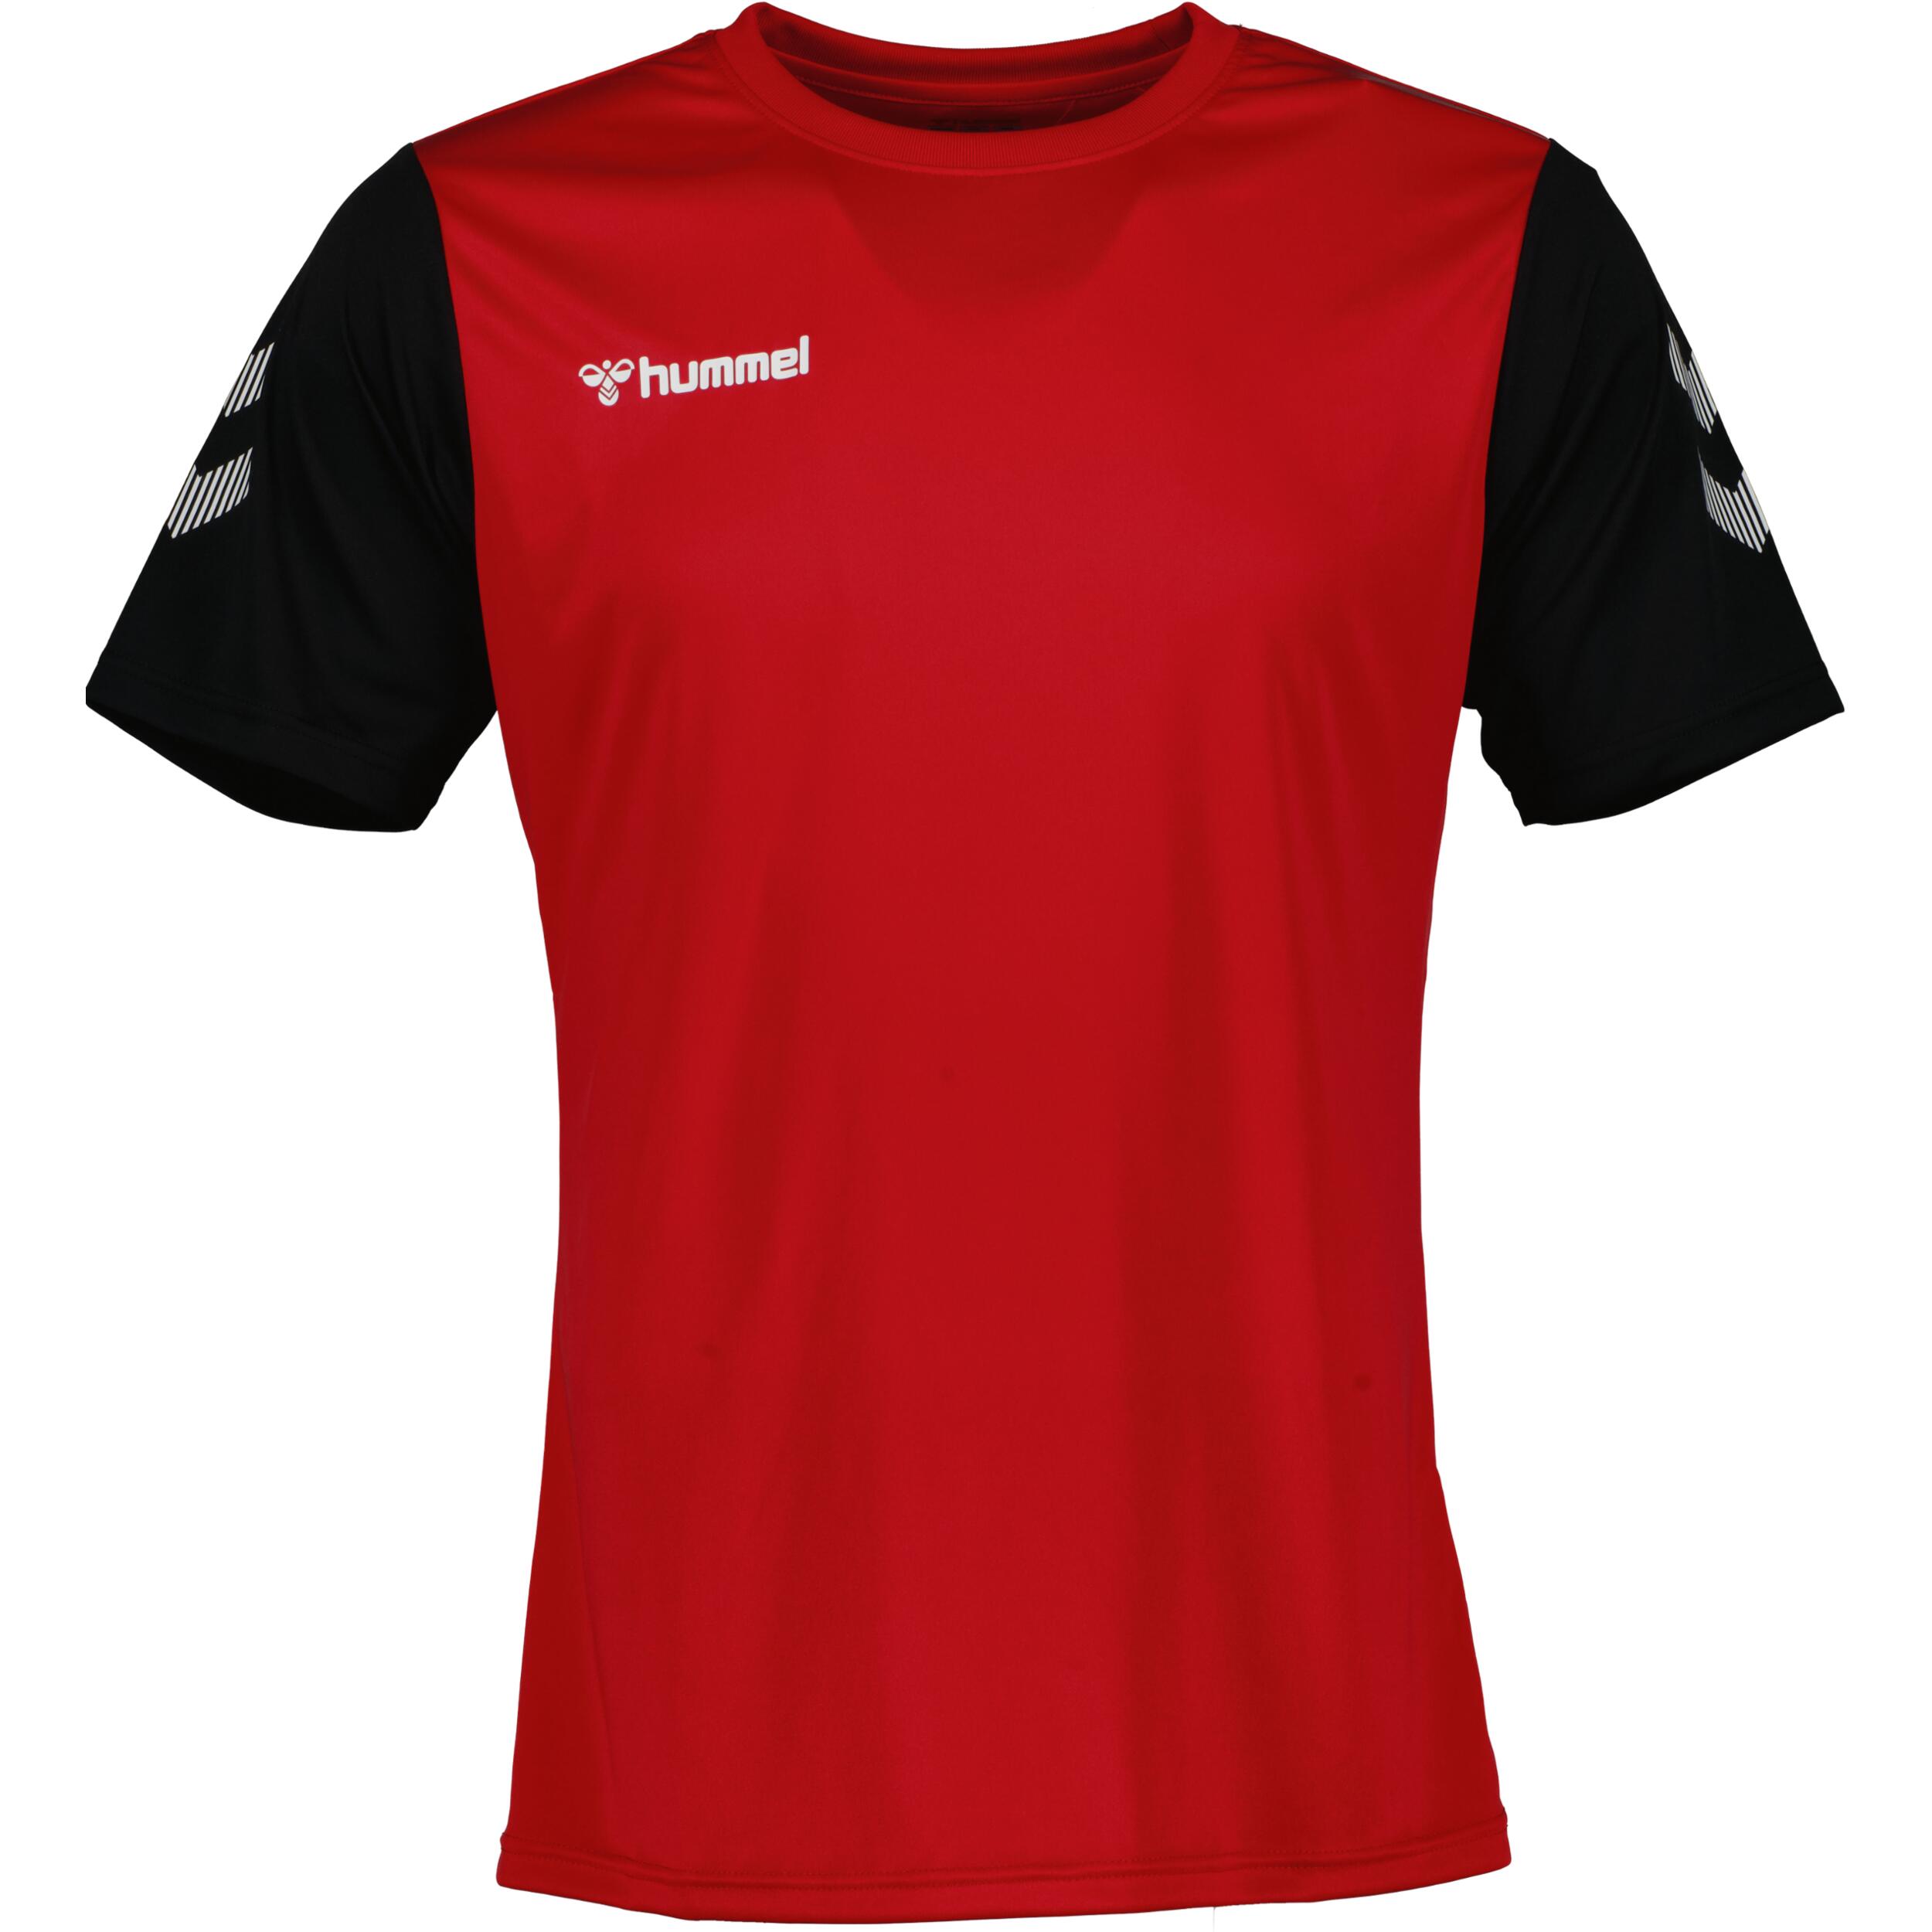 HUMMEL Match jersey for men, great for football, in red/black